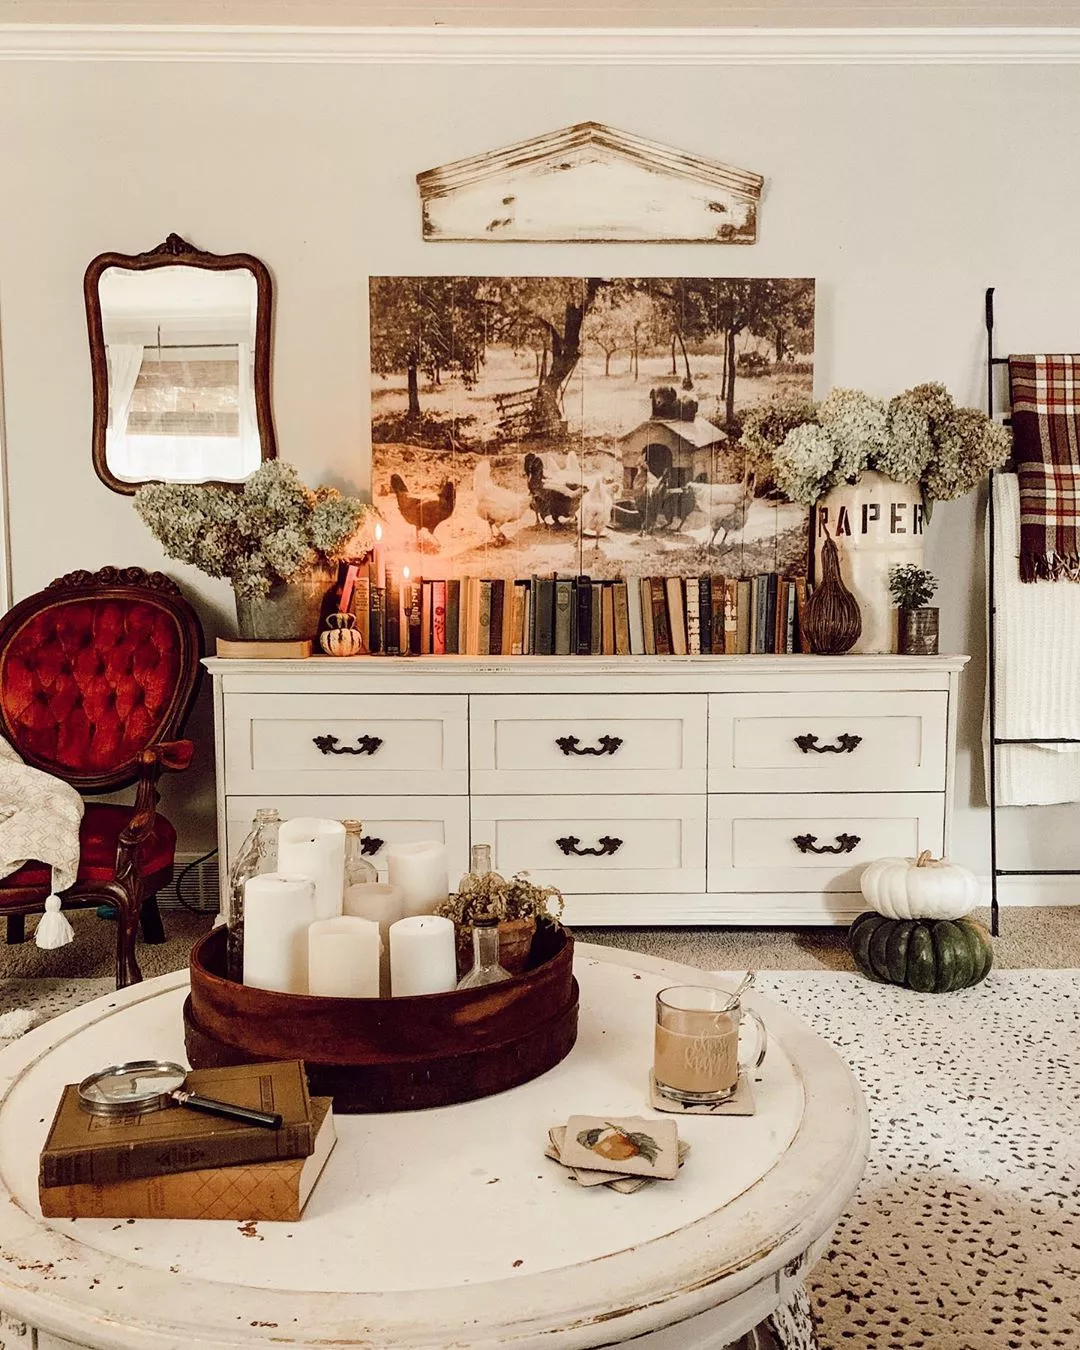 Tips on Decorating with Antiques - How to Decorate with Vintage